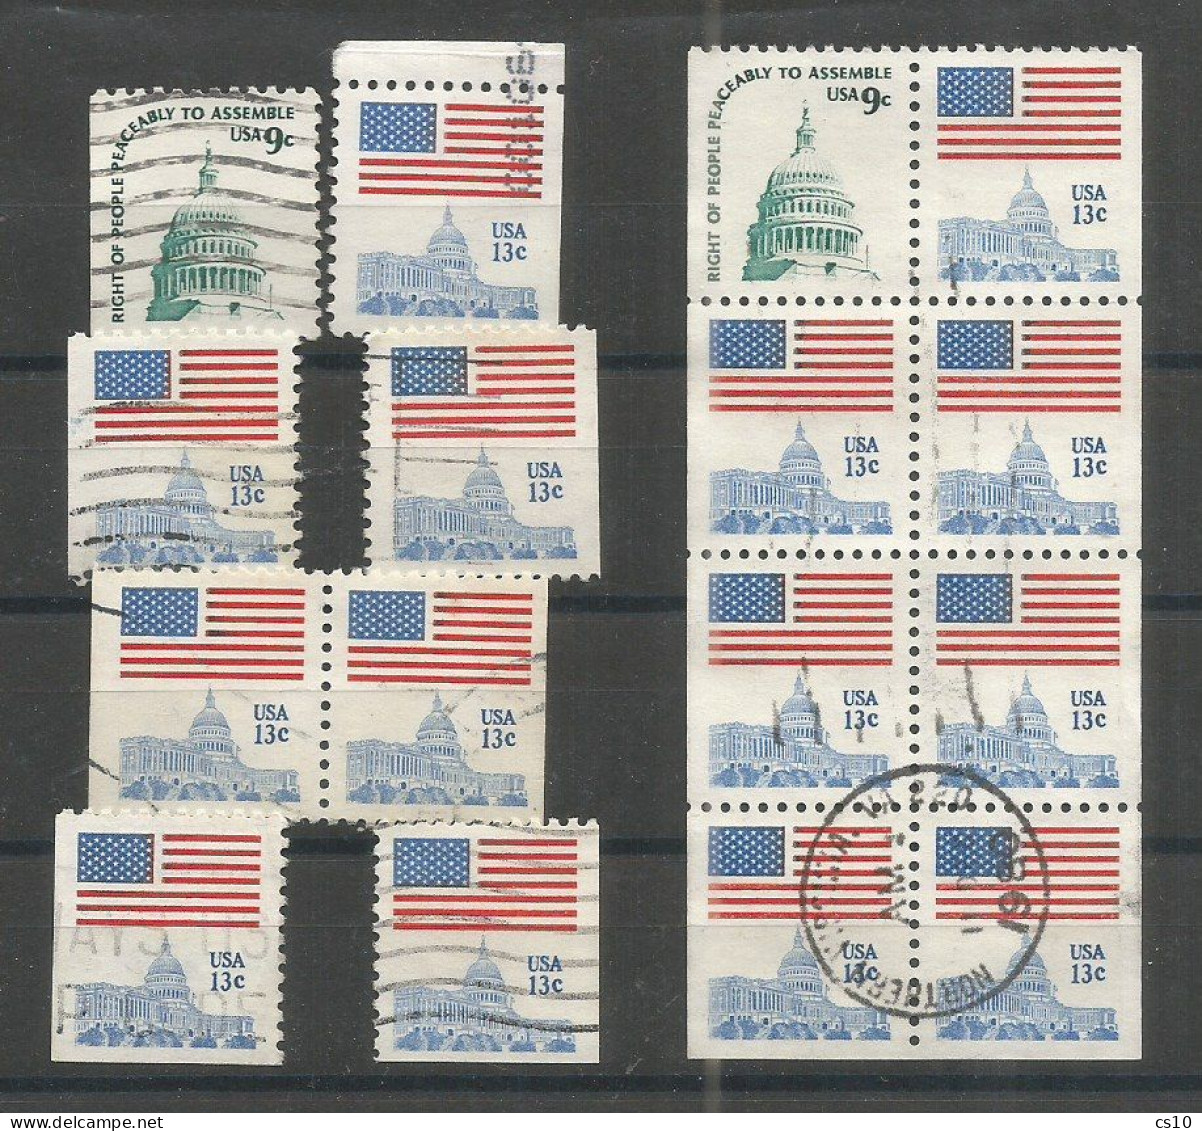 USA 1975 Americana C.9+c.13 Perf.11 Cpl Booklet Issue . Booklet Pane Used 1980 + Pair + L/R On 2/3 Sides Incl. Upper Pcs - Annate Complete